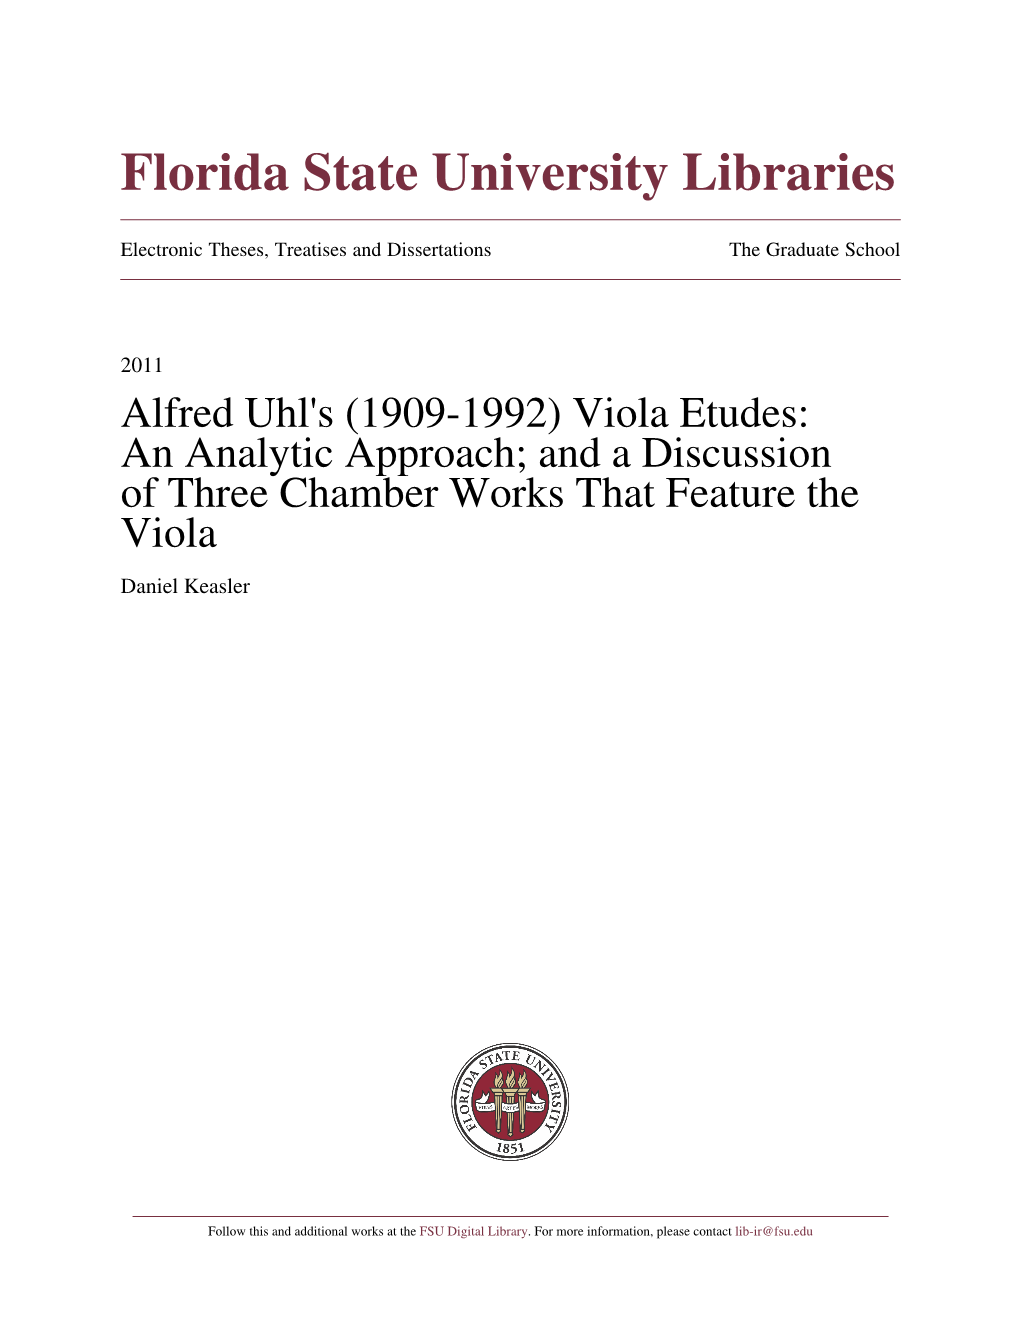 Alfred Uhl's (1909-1992) Viola Etudes: an Analytic Approach; and a Discussion of Three Chamber Works That Feature the Viola Daniel Keasler